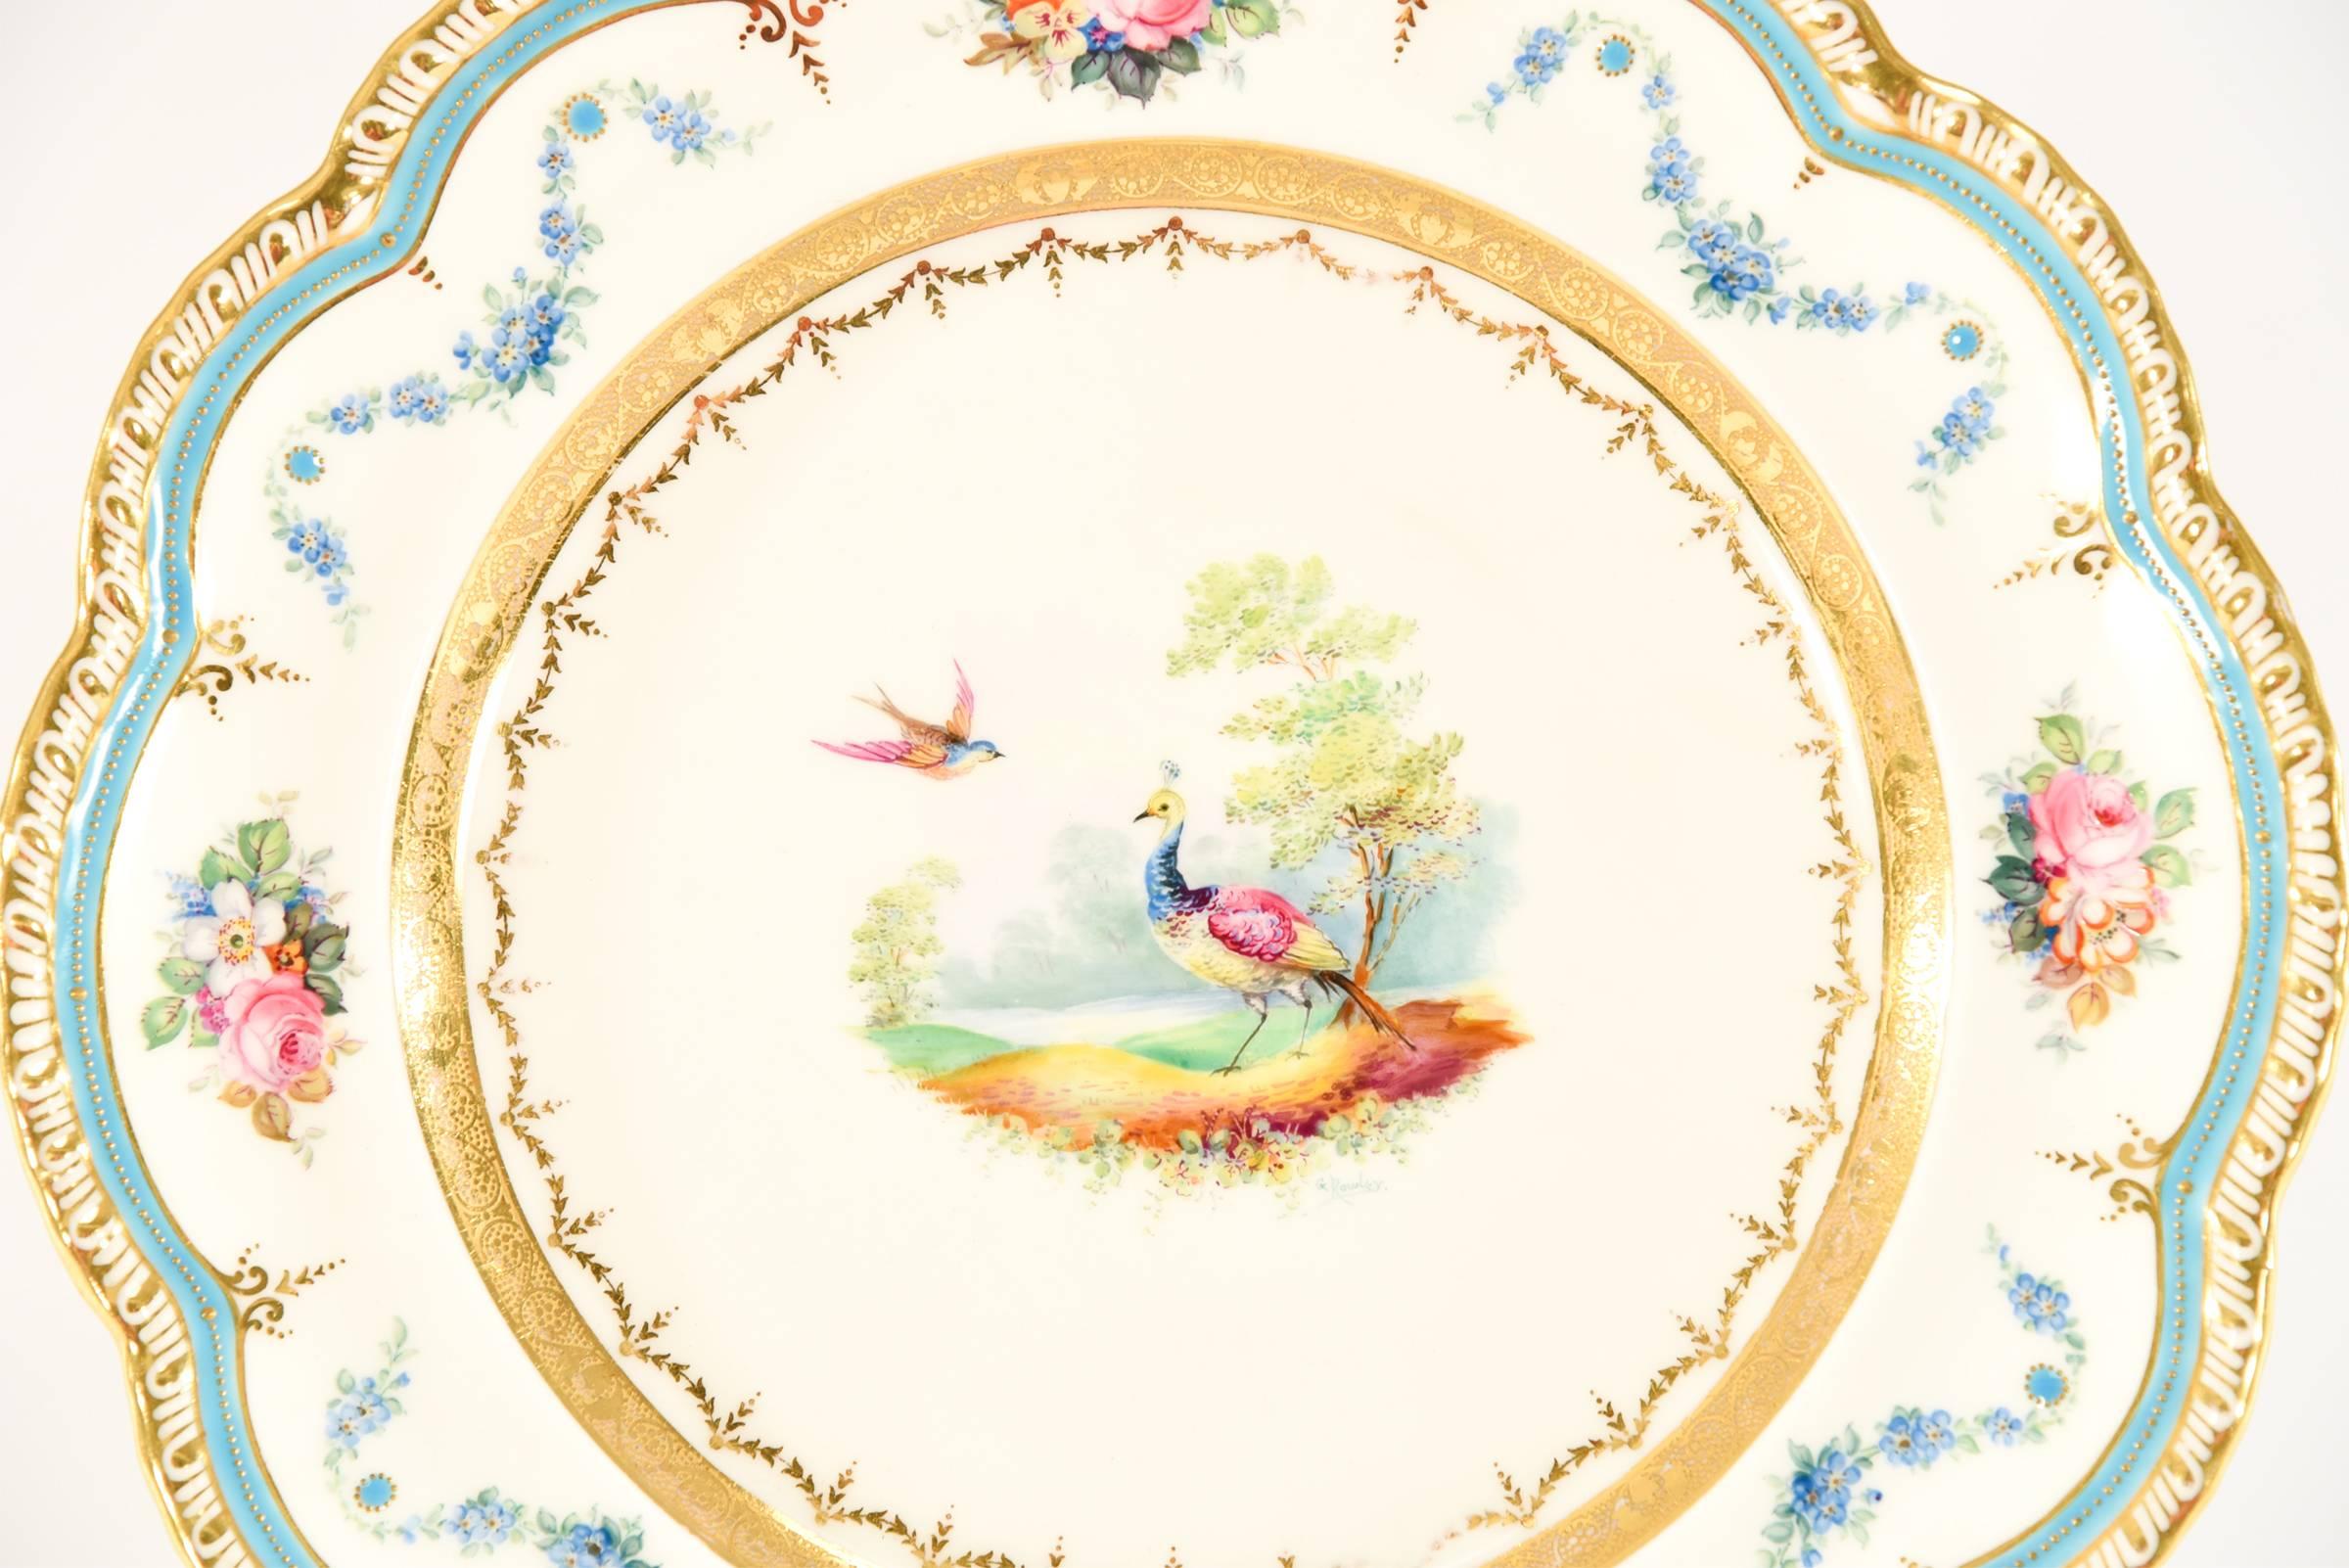 Gilt 12 Cauldon Hand Painted Signed G Rowley Ornate Exotic Bird & Floral Desserts For Sale